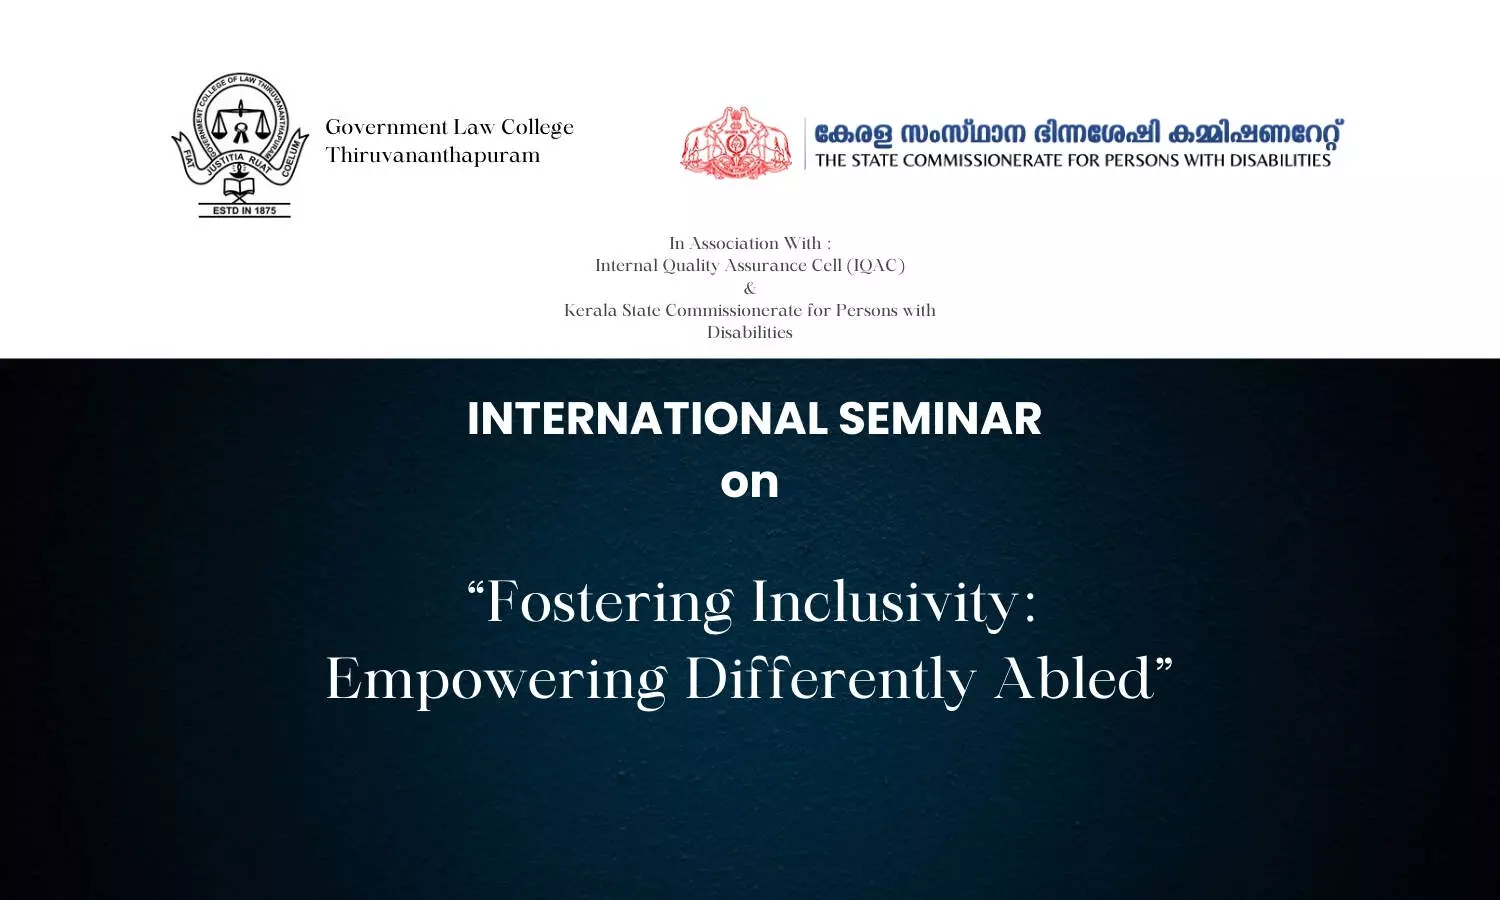 Call for Papers: International Seminar on Fostering Inclusivity - Empowering Differently Abled | GLC Thiruvananthapuram